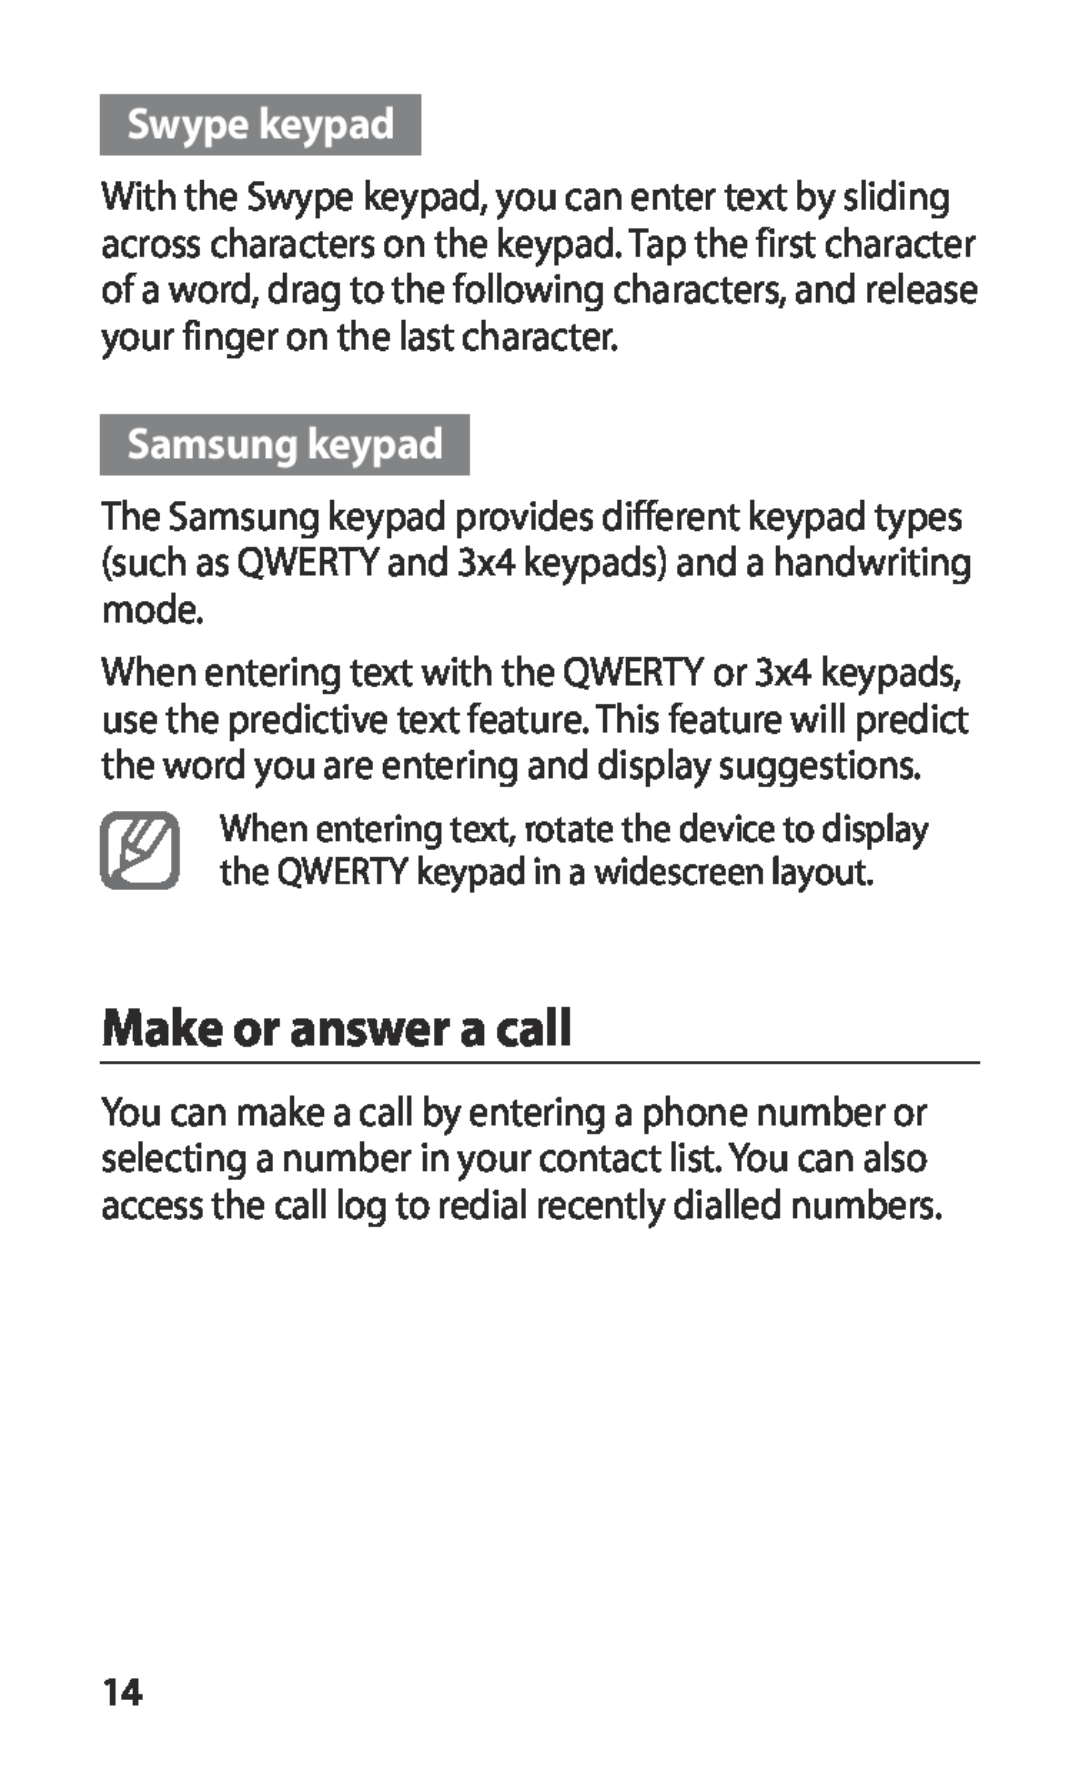 Samsung GT-S5660SWASEB, GT-S5660DSATPH, GT-S5660SWATPH, GT-S5660SWATCL Make or answer a call, Swype keypad, Samsung keypad 